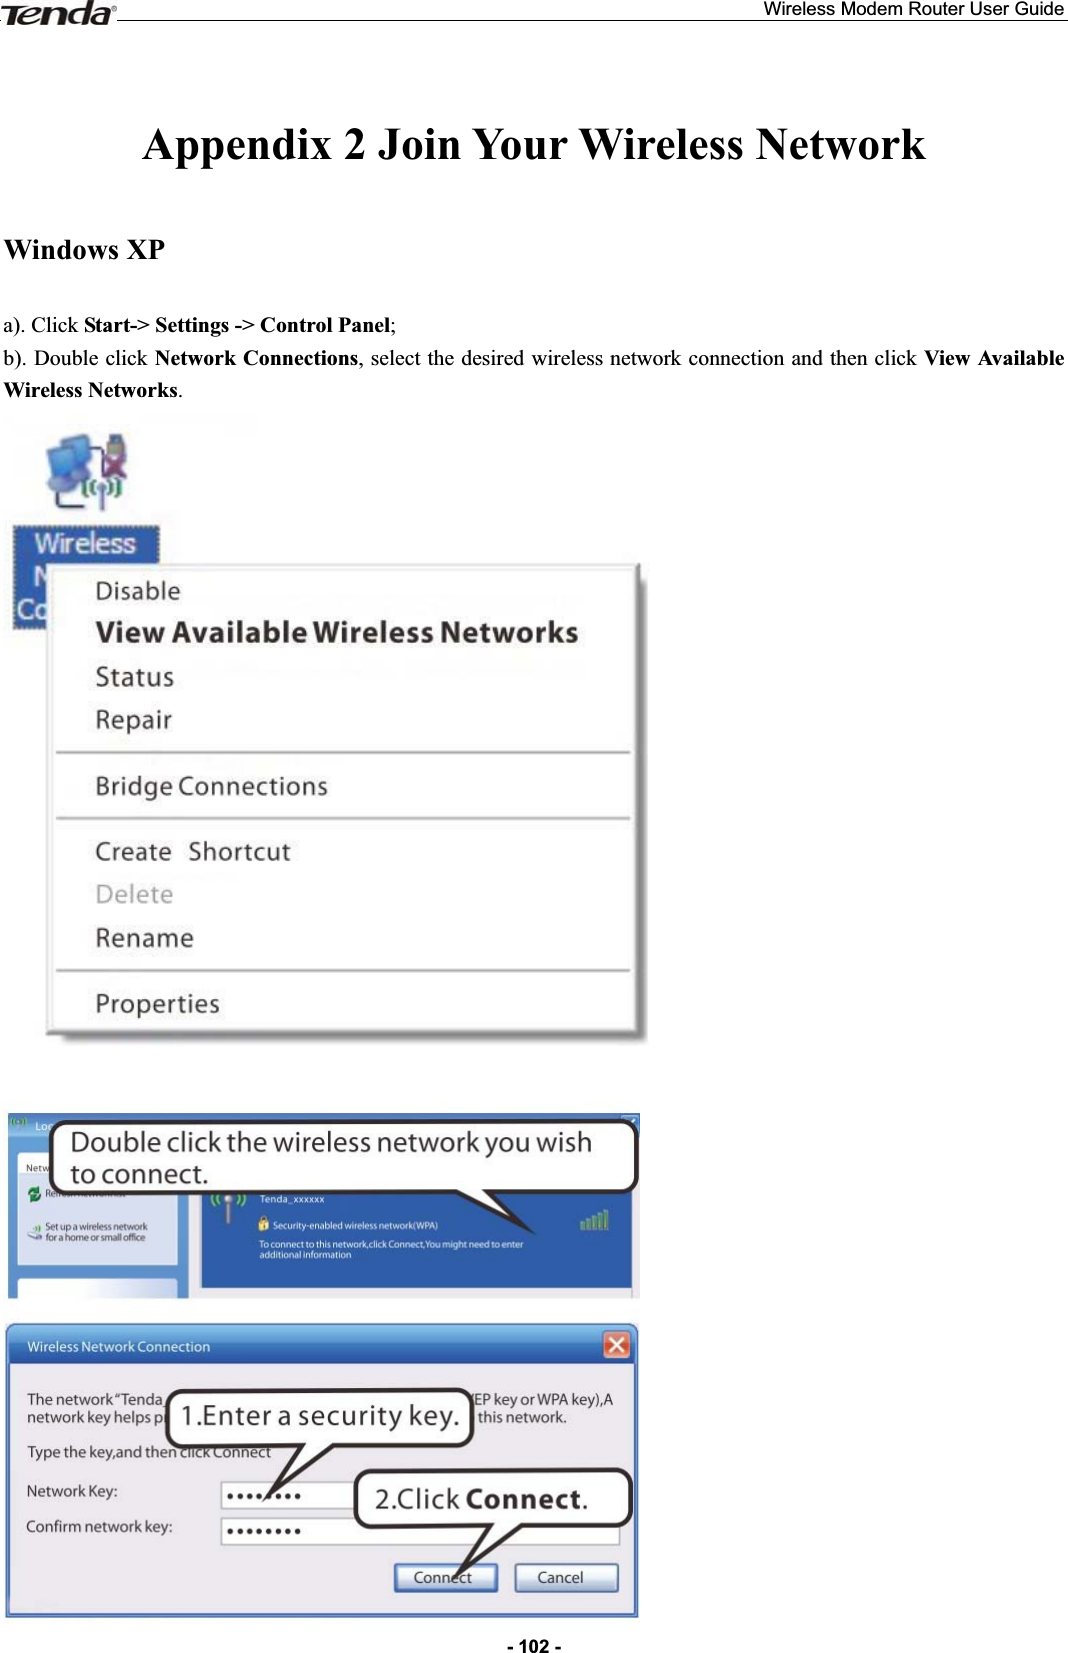 Wireless Modem Router User Guide- 102 -Appendix 2 Join Your Wireless Network Windows XP a). Click Start-&gt; Settings -&gt; Control Panel;b). Double click Network Connections, select the desired wireless network connection and then click View Available Wireless Networks.